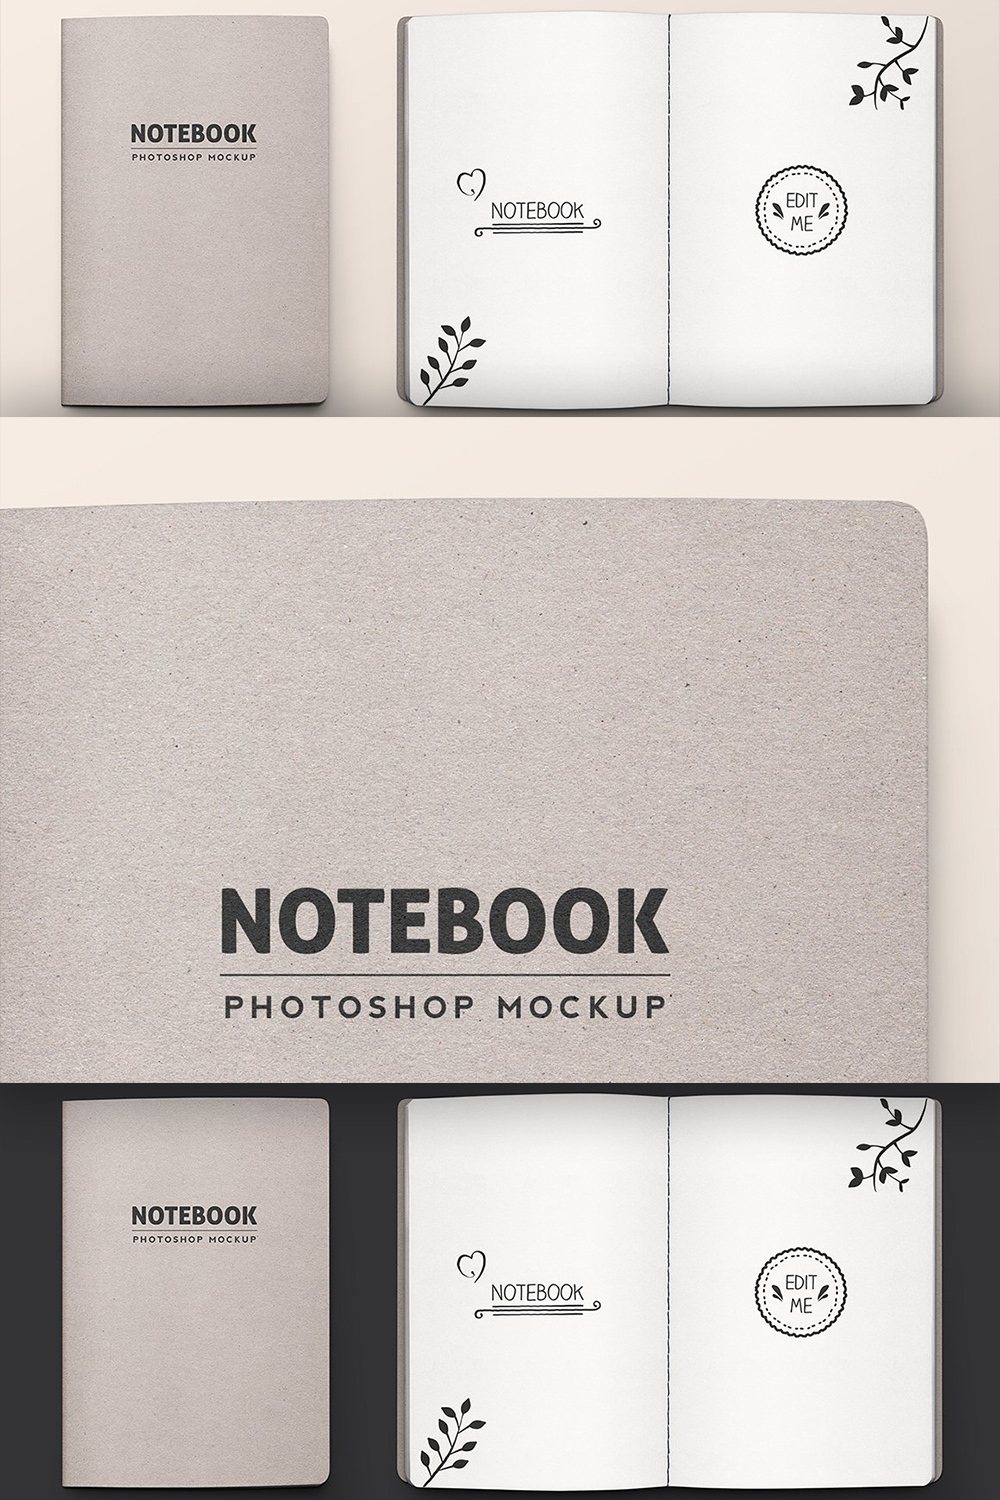 A pack of images of stitched notebook with an enchanting design.